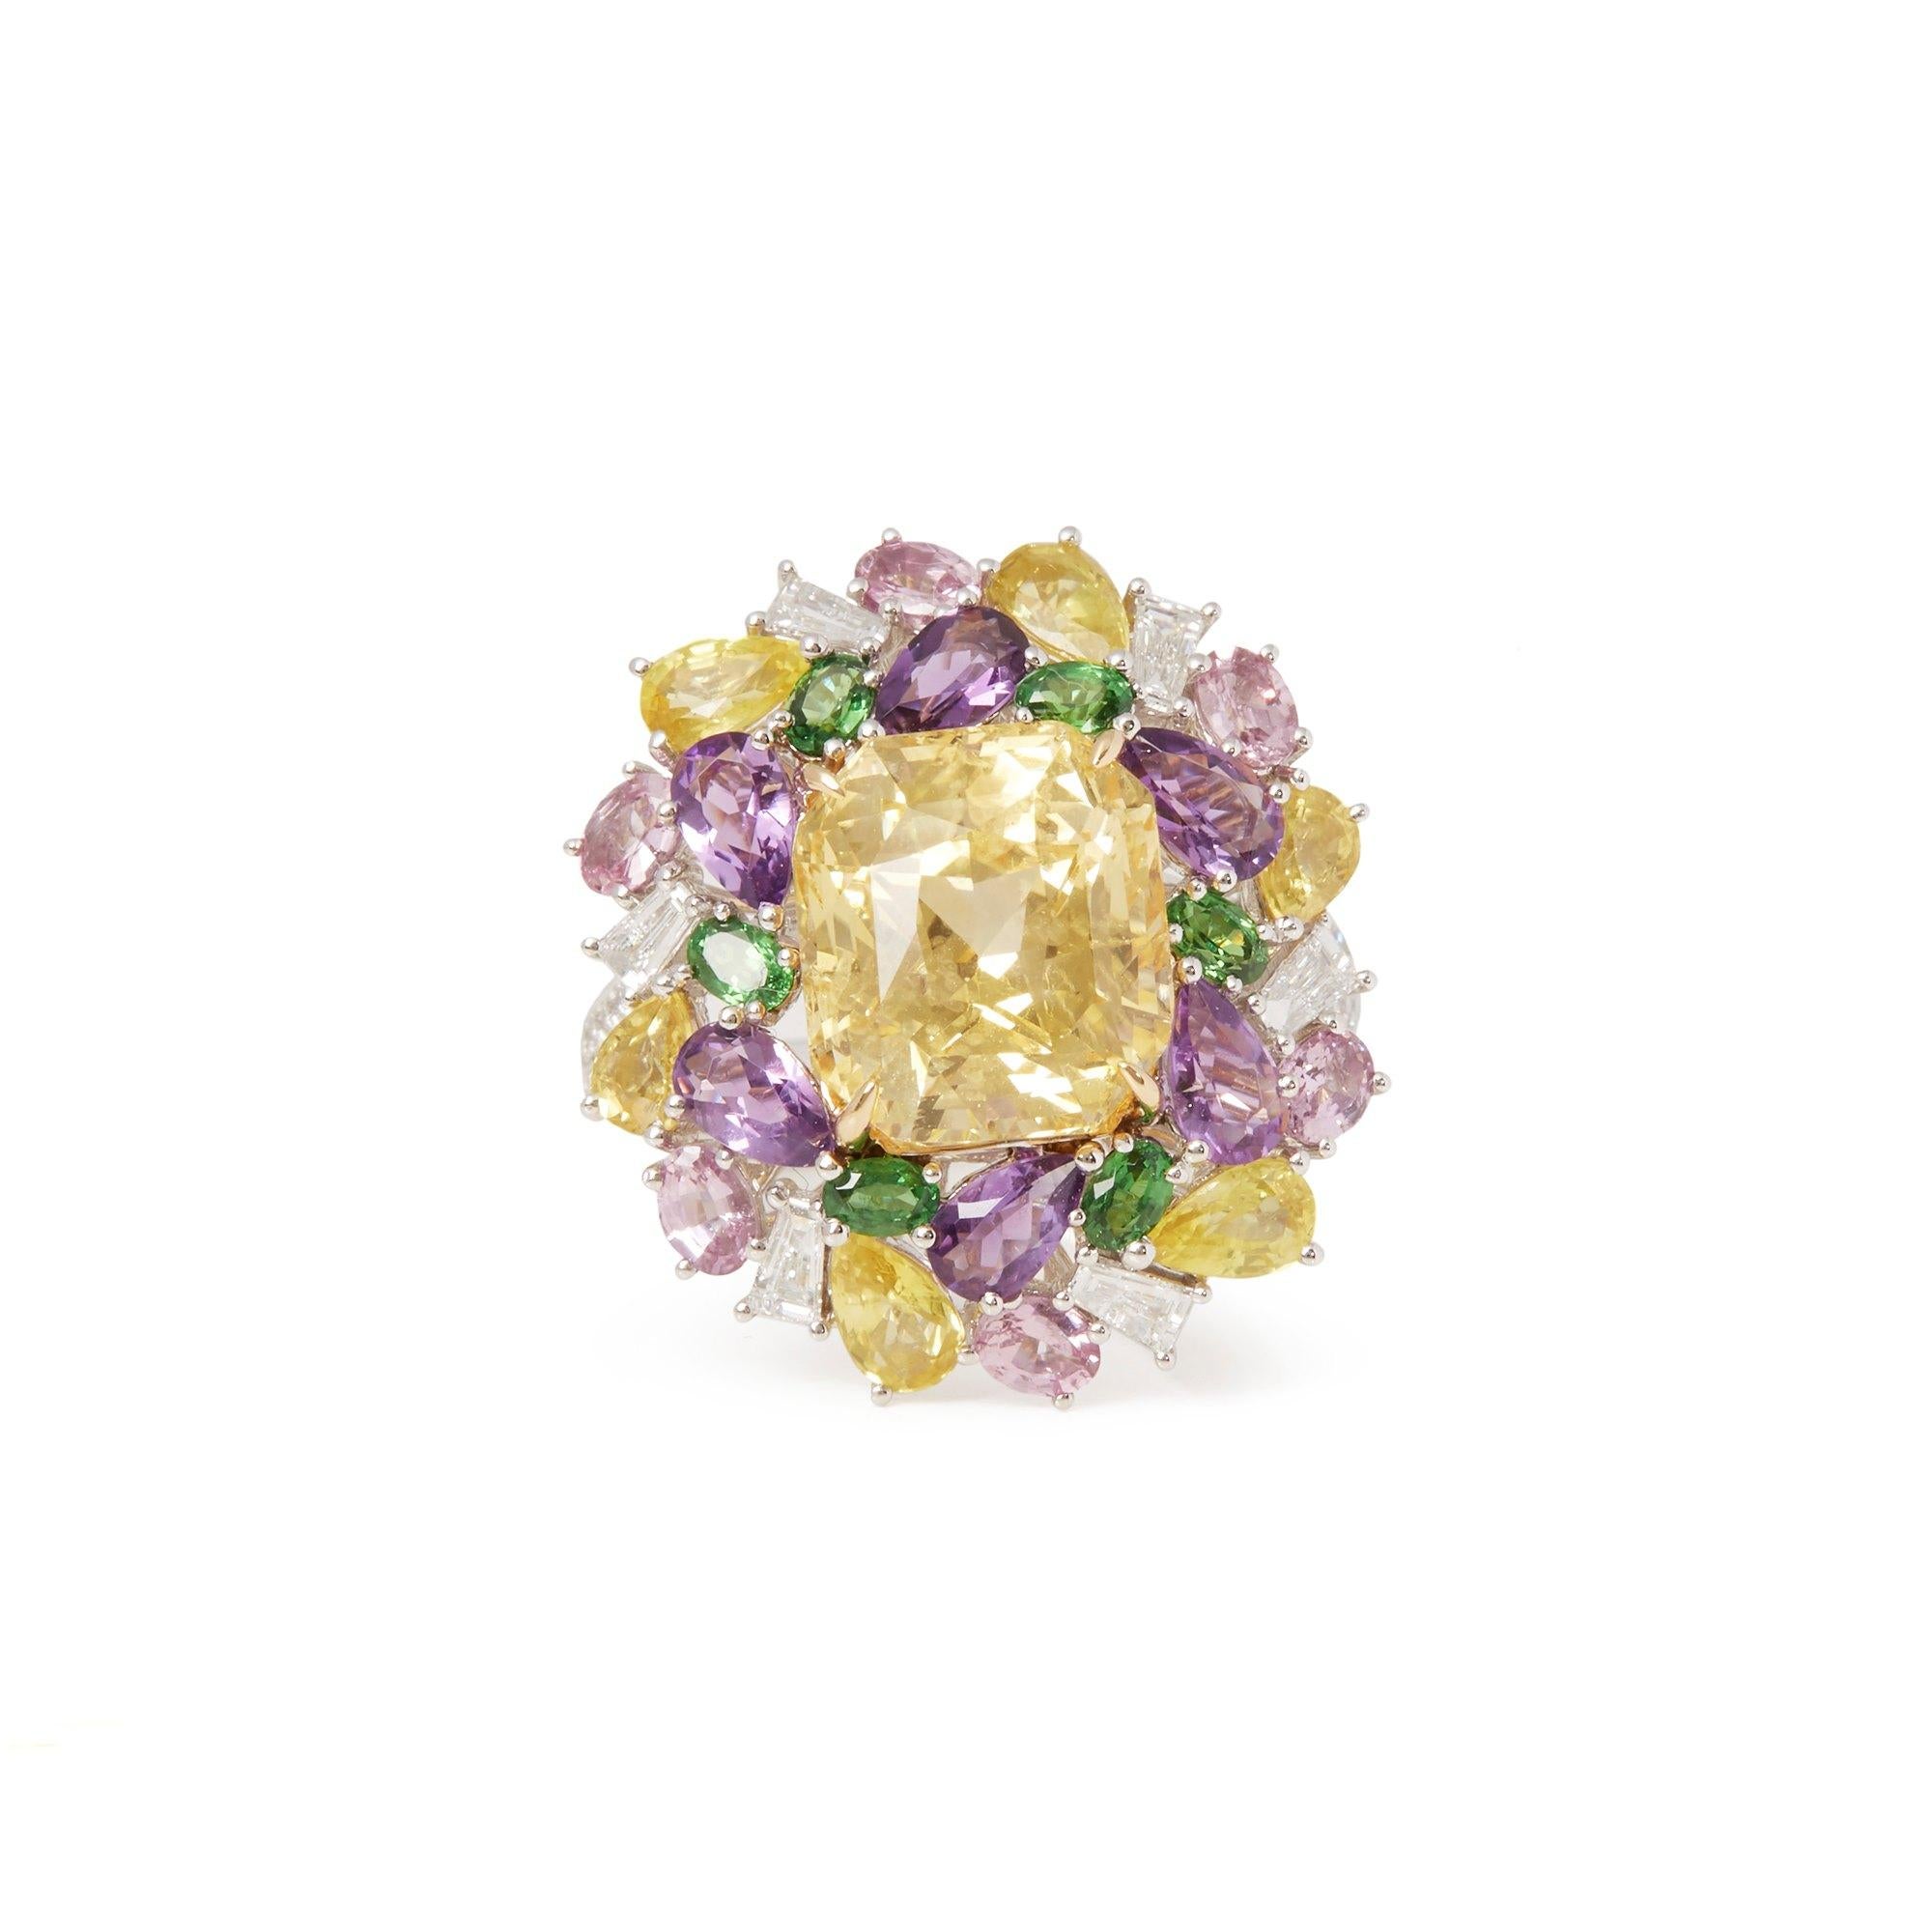 This ring designed by David Jerome is from his private collection and features one cushion cut yellow Sapphire totalling 8.26cts sourced in Sri Lanka. Set with mixed fancy colour Sapphires and round Brilliant cut Diamonds totalling 0.50cts mounted